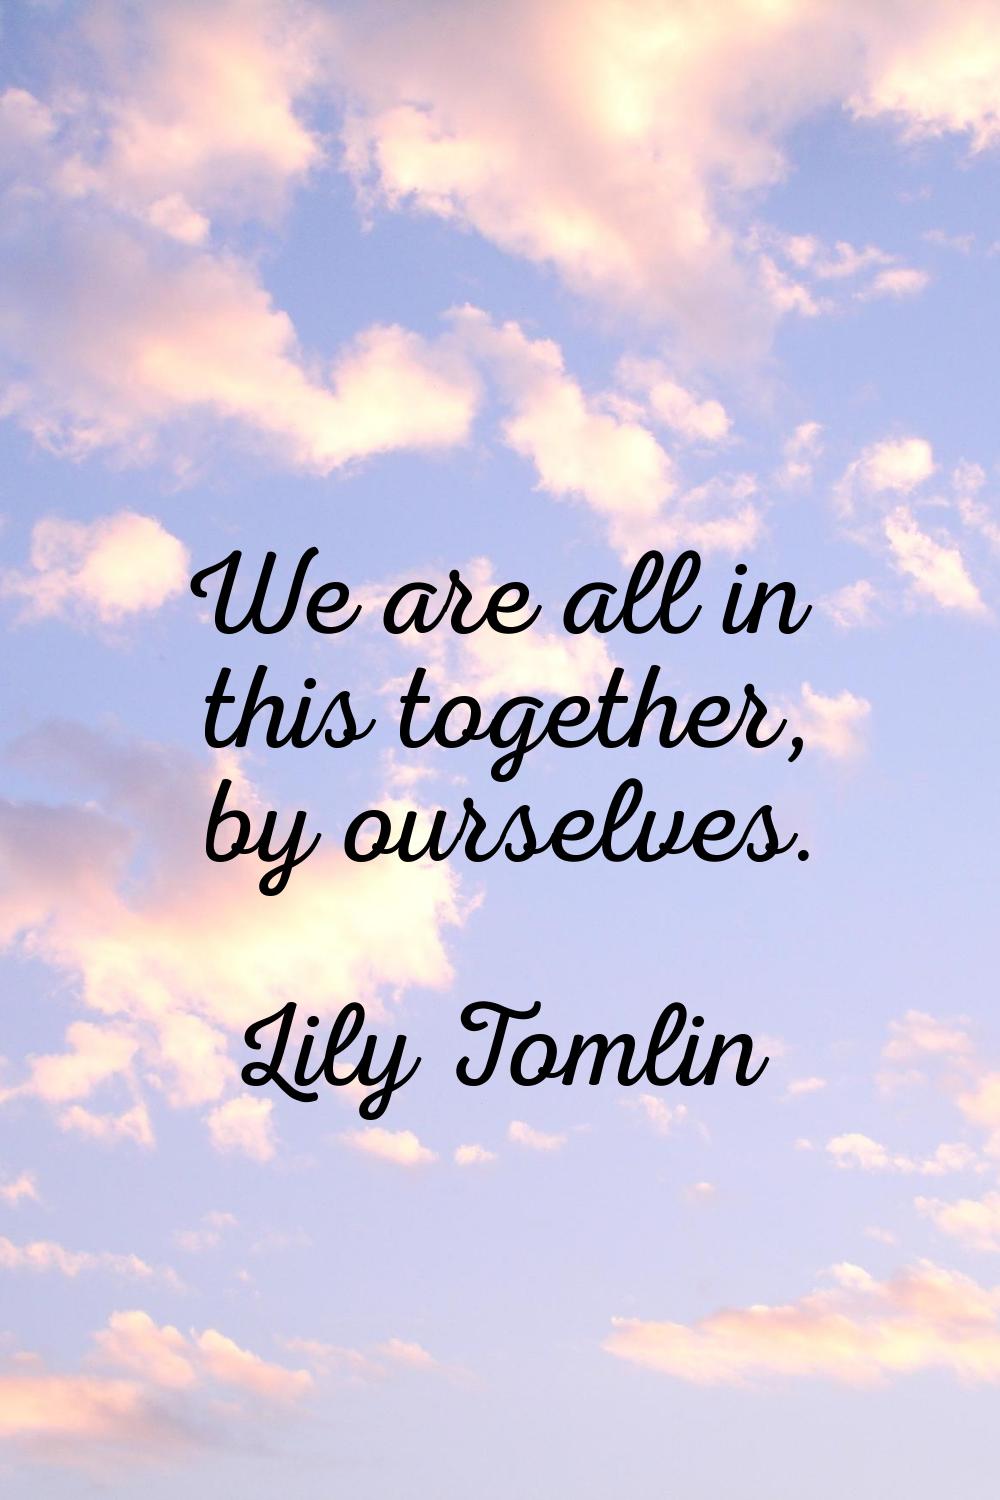 We are all in this together, by ourselves.